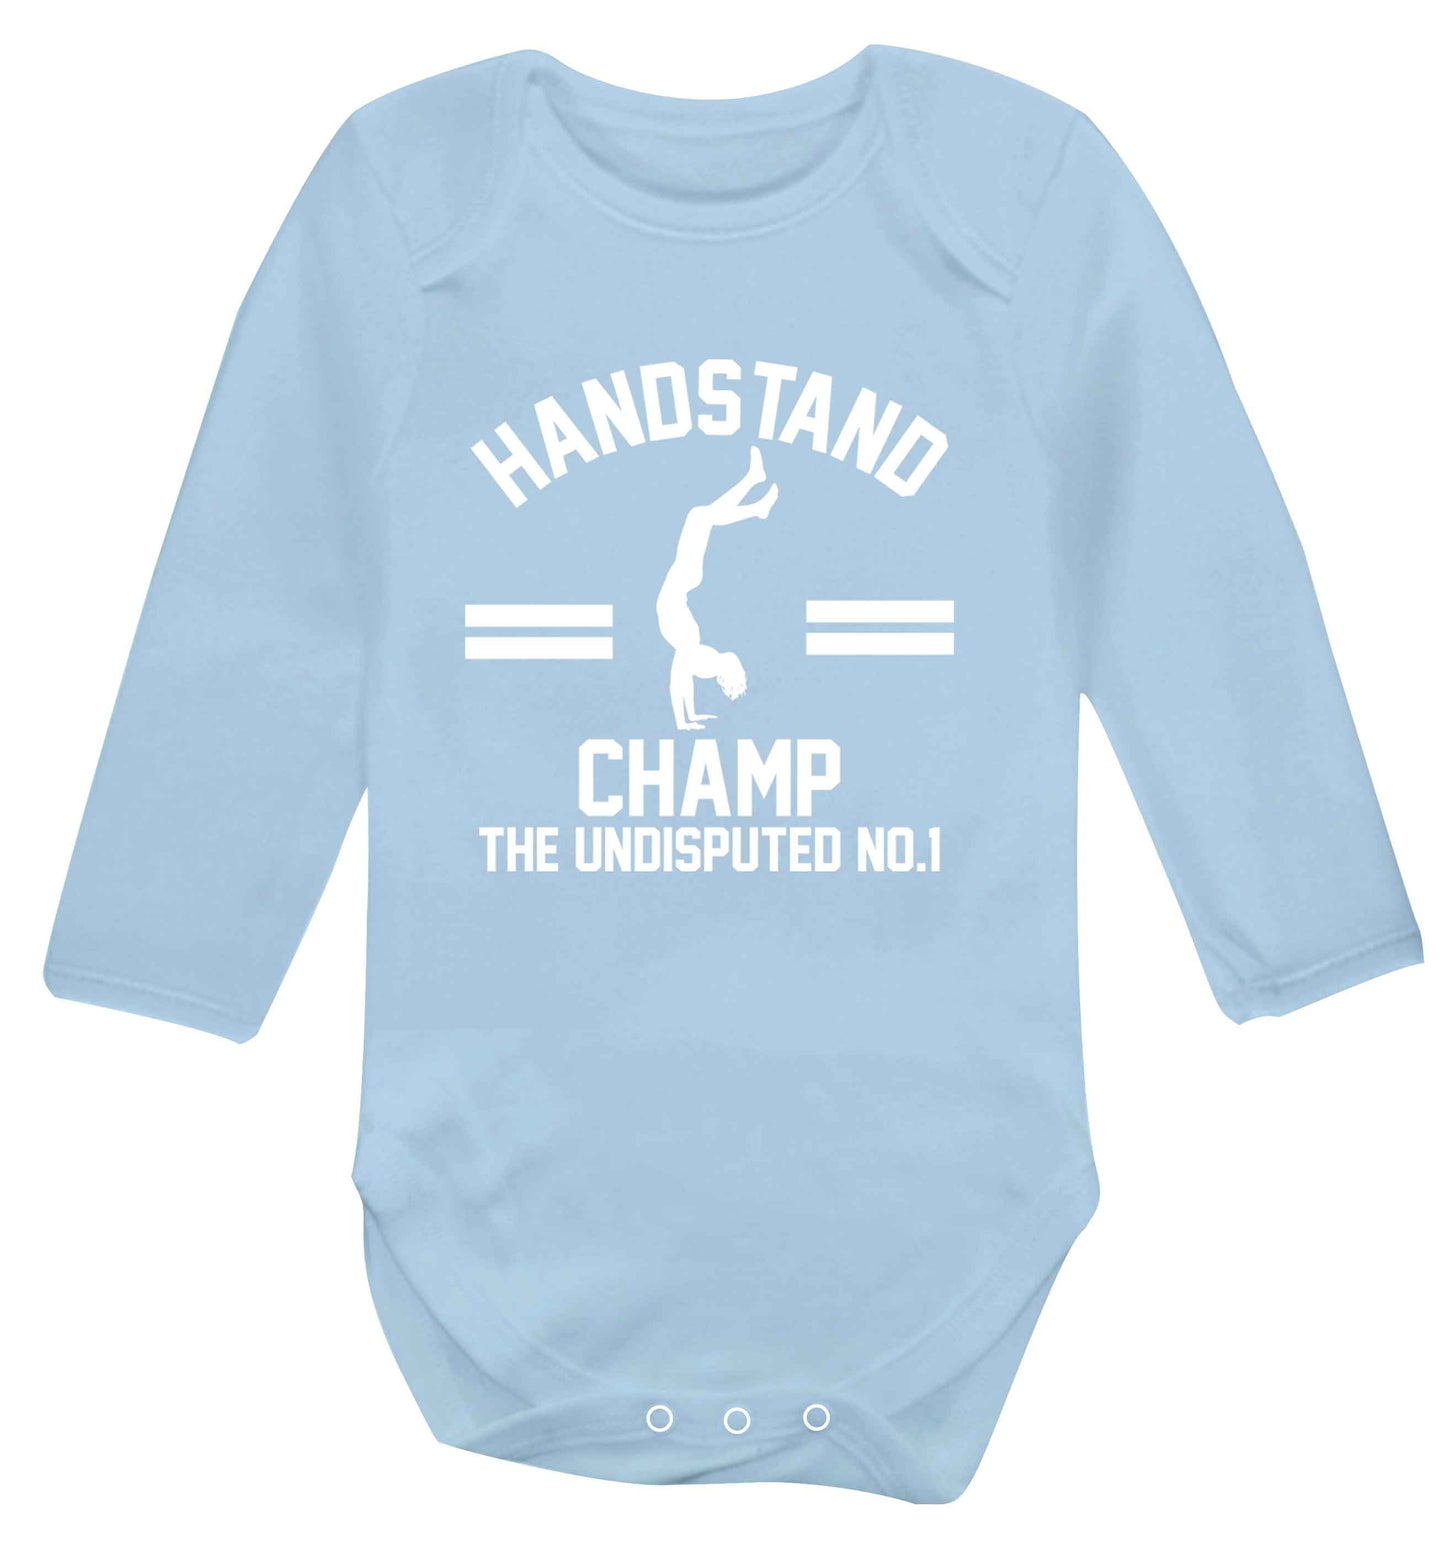 Undisputed handstand championship no.1  Baby Vest long sleeved pale blue 6-12 months